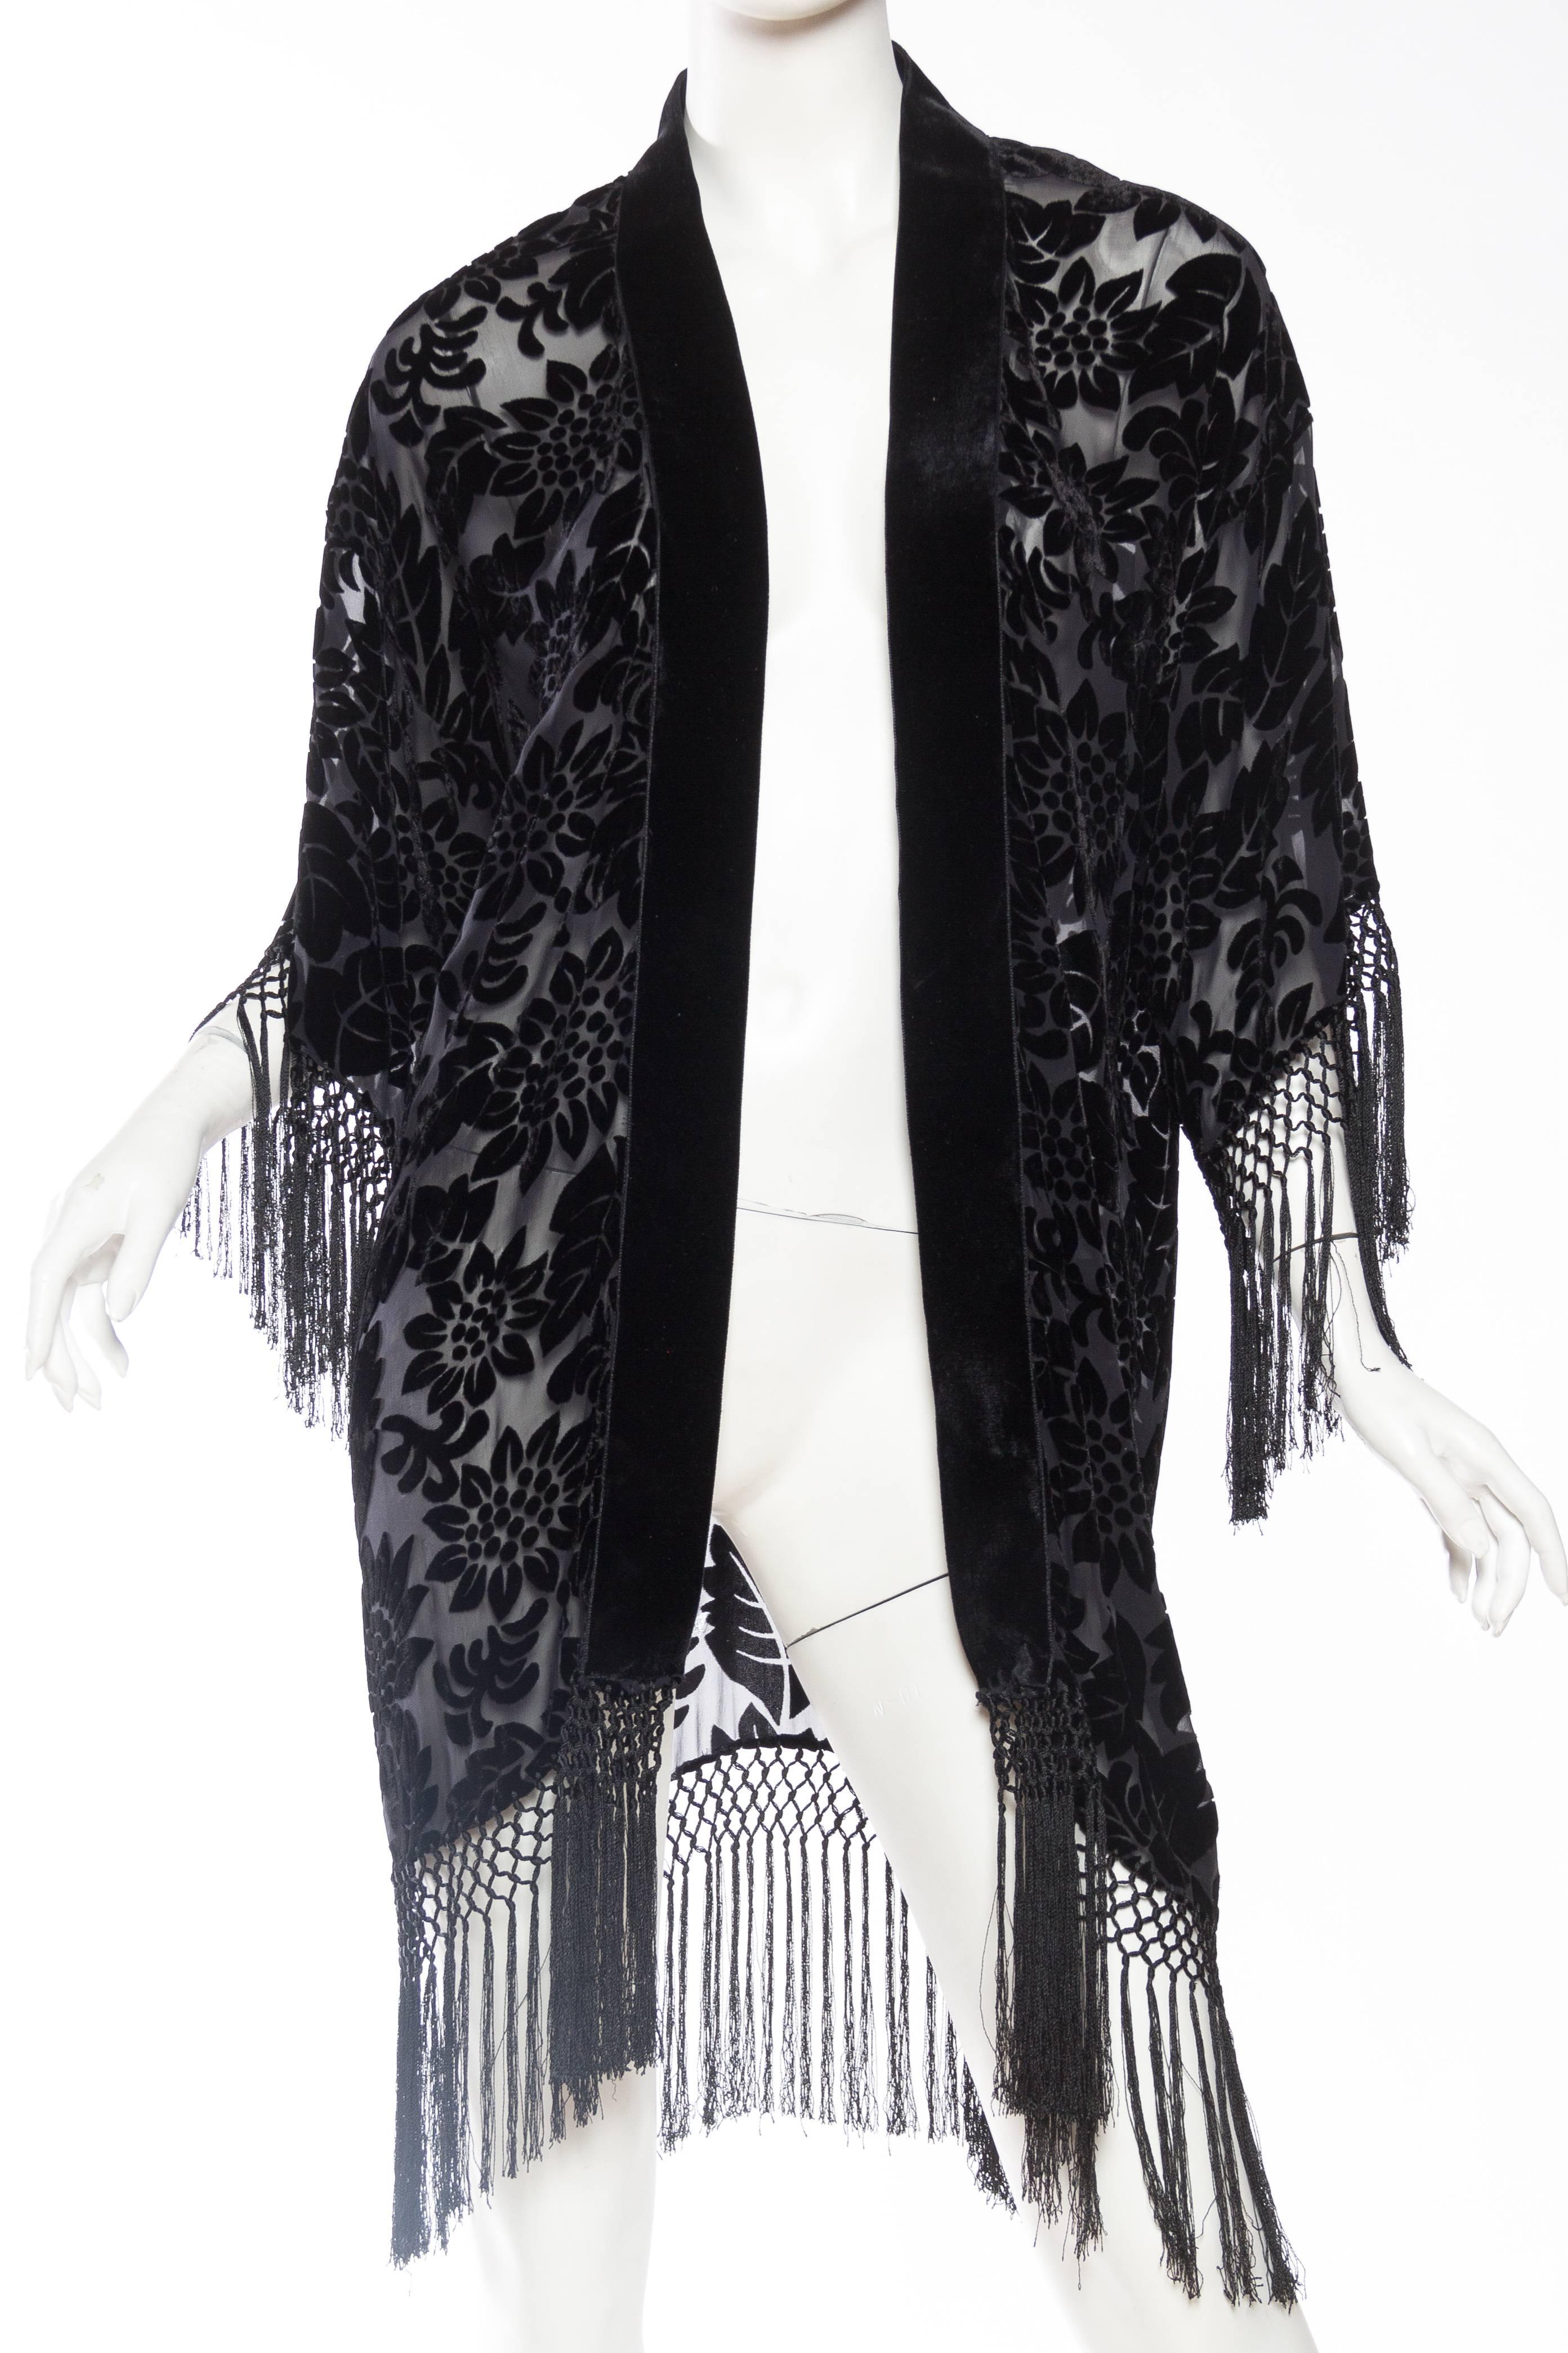 MORPHEW COLLECTION Black Floral Silk Burnout Velvet Sheer Fringed  Kimono
MORPHEW COLLECTION is made entirely by hand in our NYC Ateliér of rare antique materials sourced from around the globe. Our sustainable vintage materials represent over a